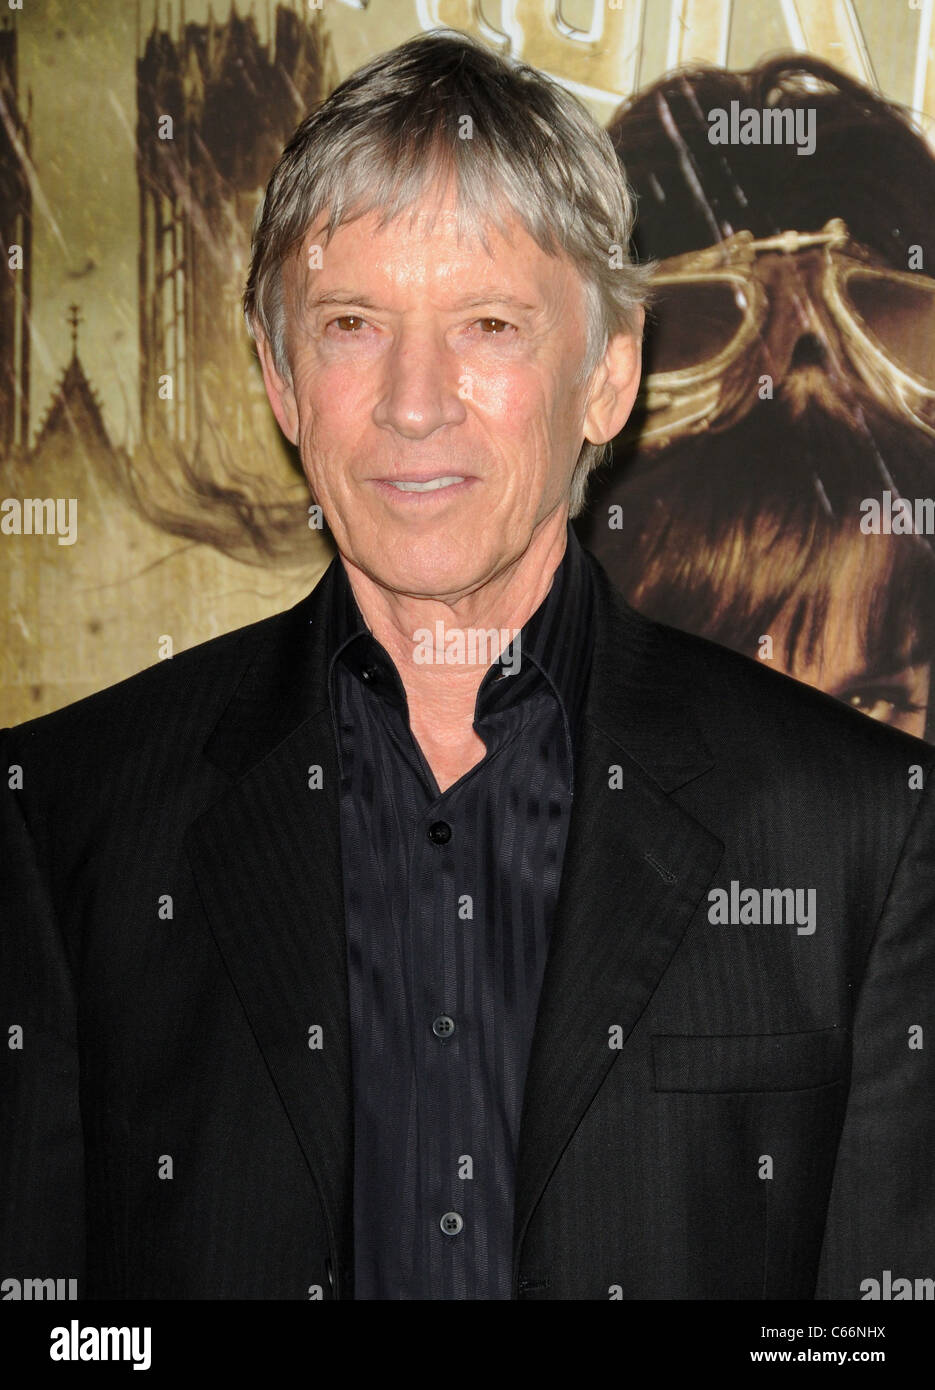 Scott Glenn at arrivals for SUCKER PUNCH Premiere, Grauman's Chinese Theatre, Los Angeles, CA March 23, 2011. Photo By: Dee Cercone/Everett Collection Stock Photo